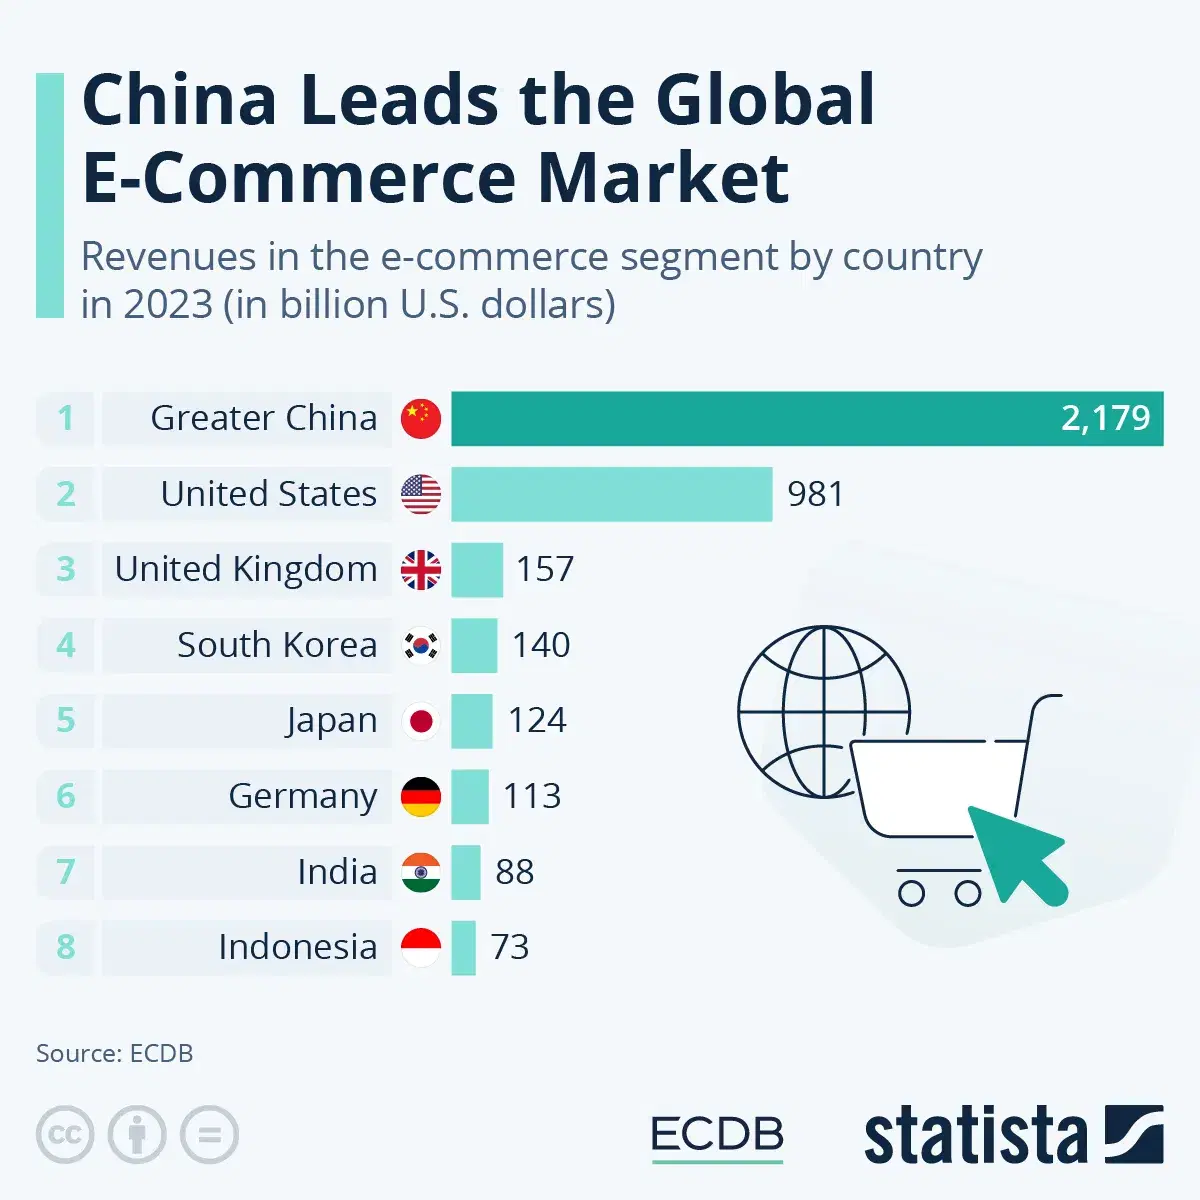 China Leads the Global E-Commerce Market